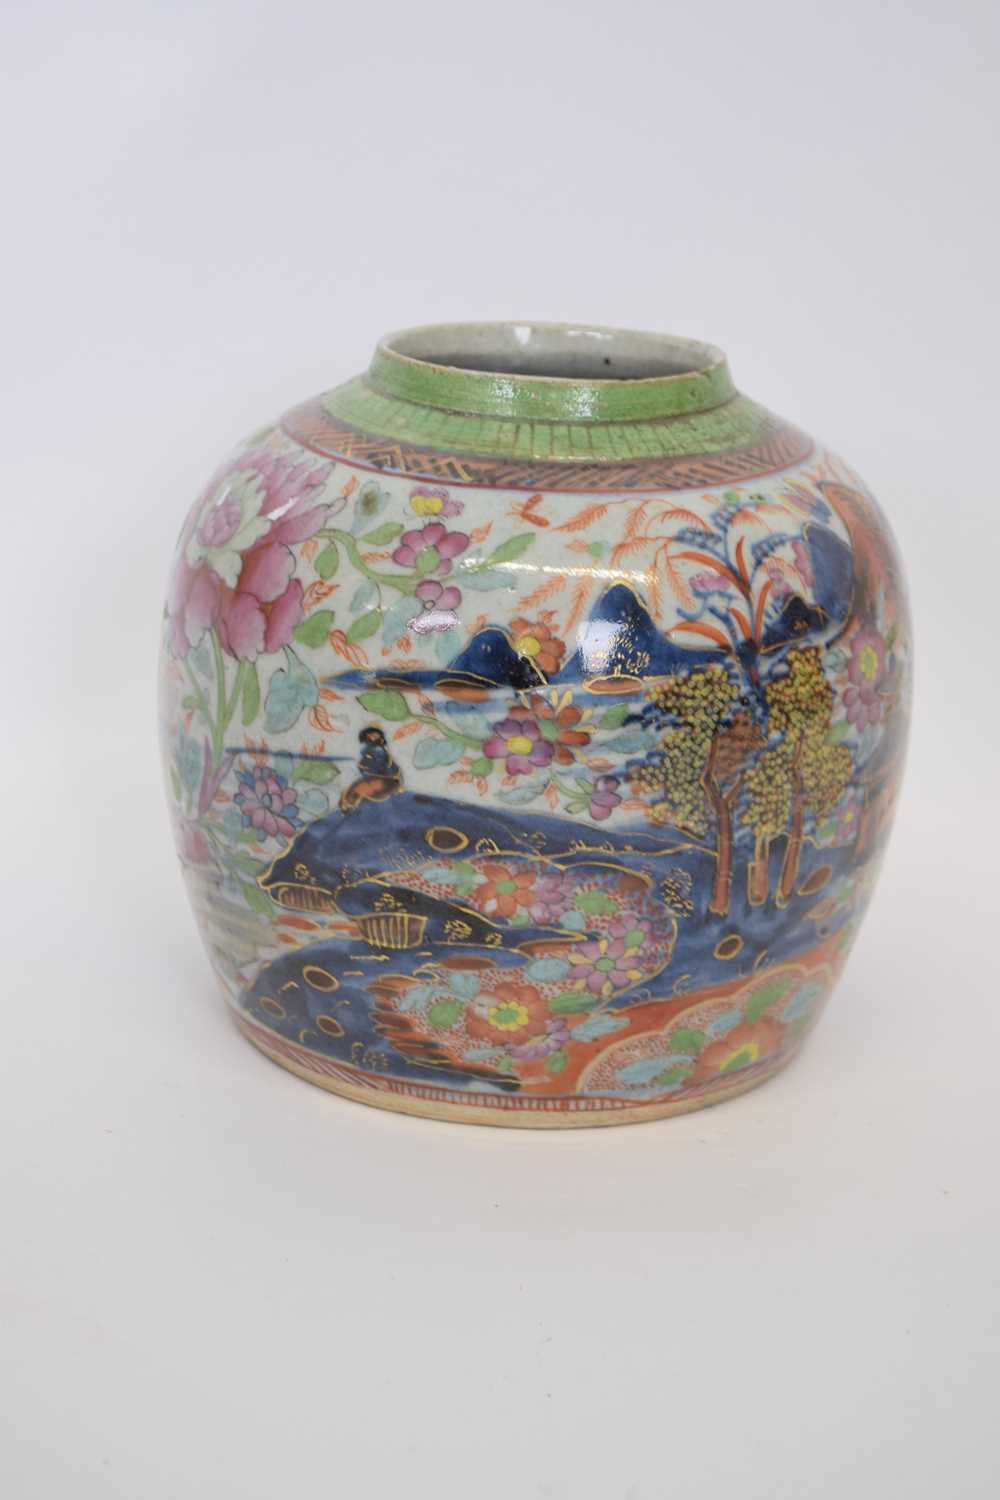 Late 18th/early 19th century Chinese porcelain ginger jar with overglaze European decoration